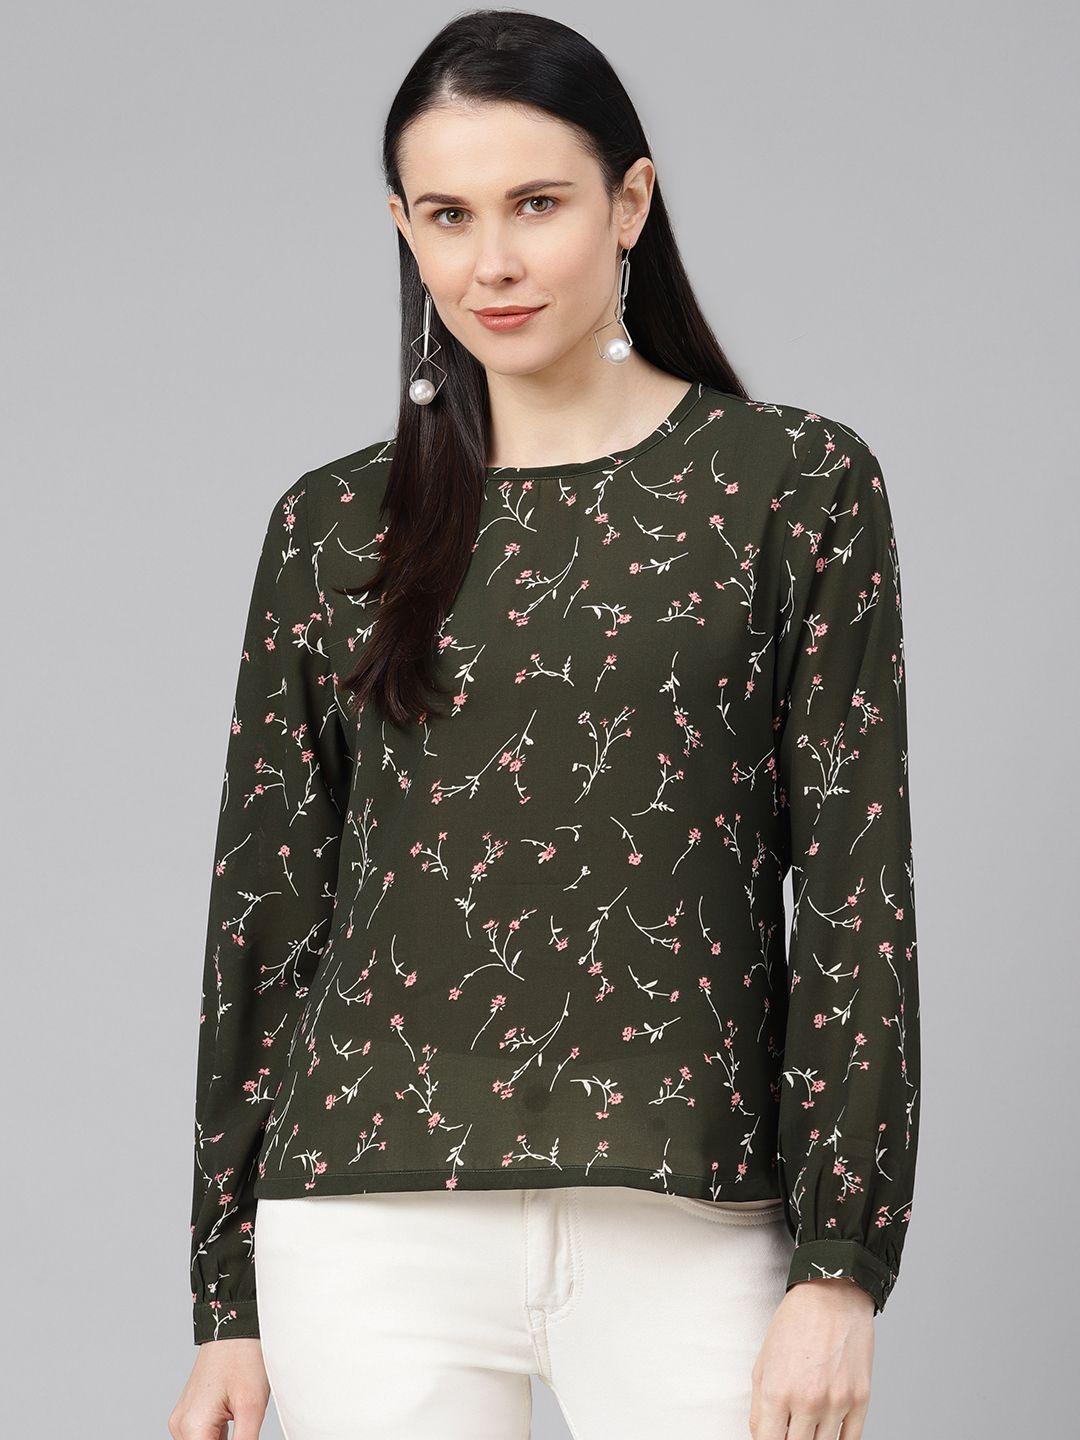 provogue women olive green & pink floral printed top